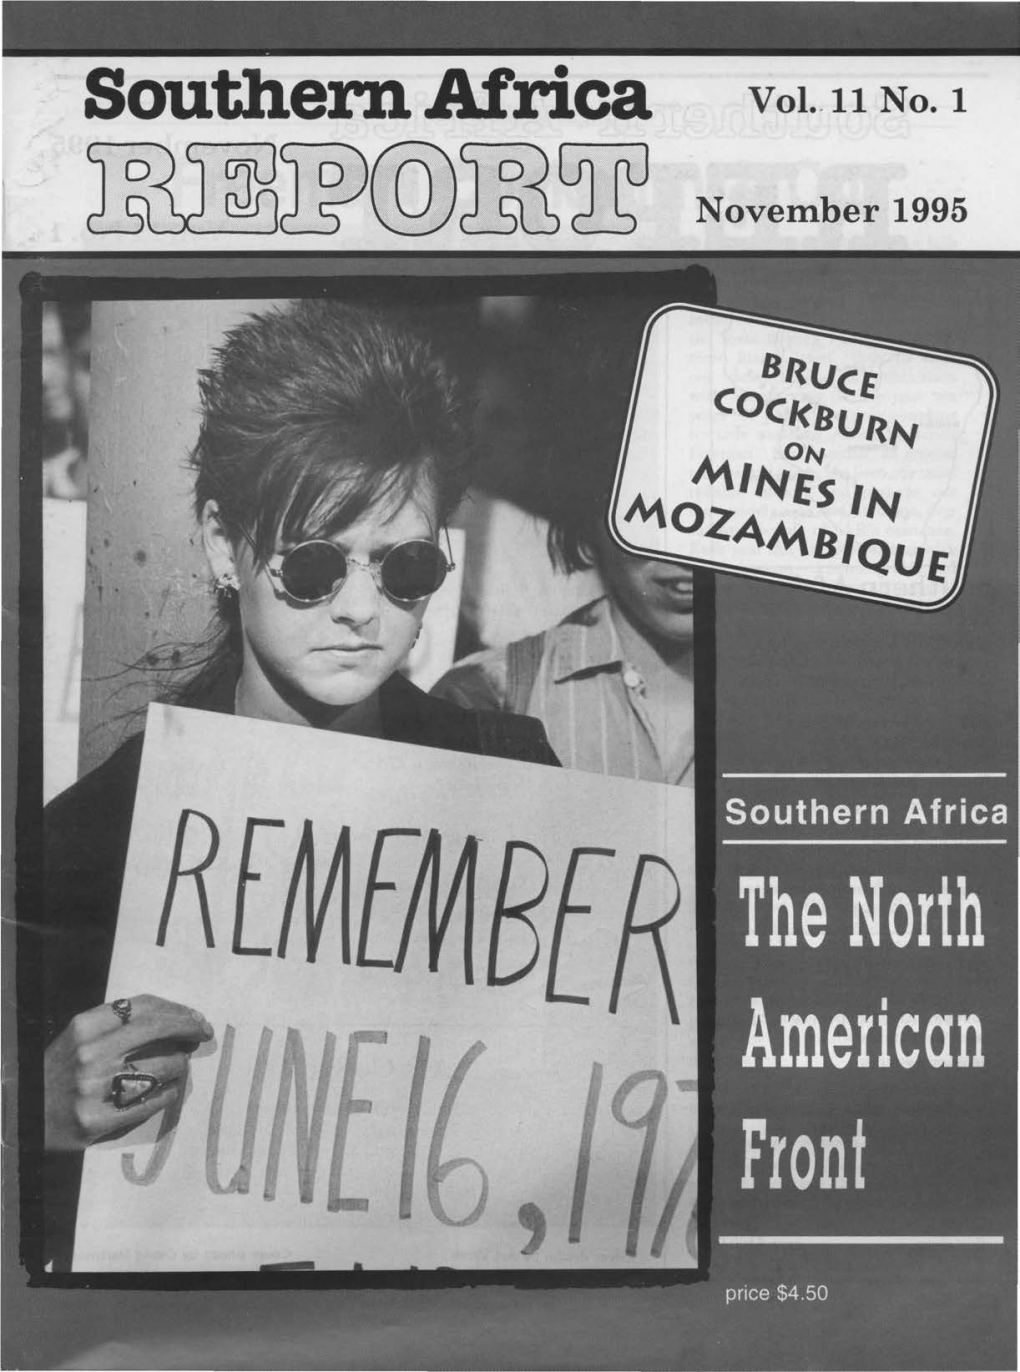 Southern Africa Vol..11 No. 1